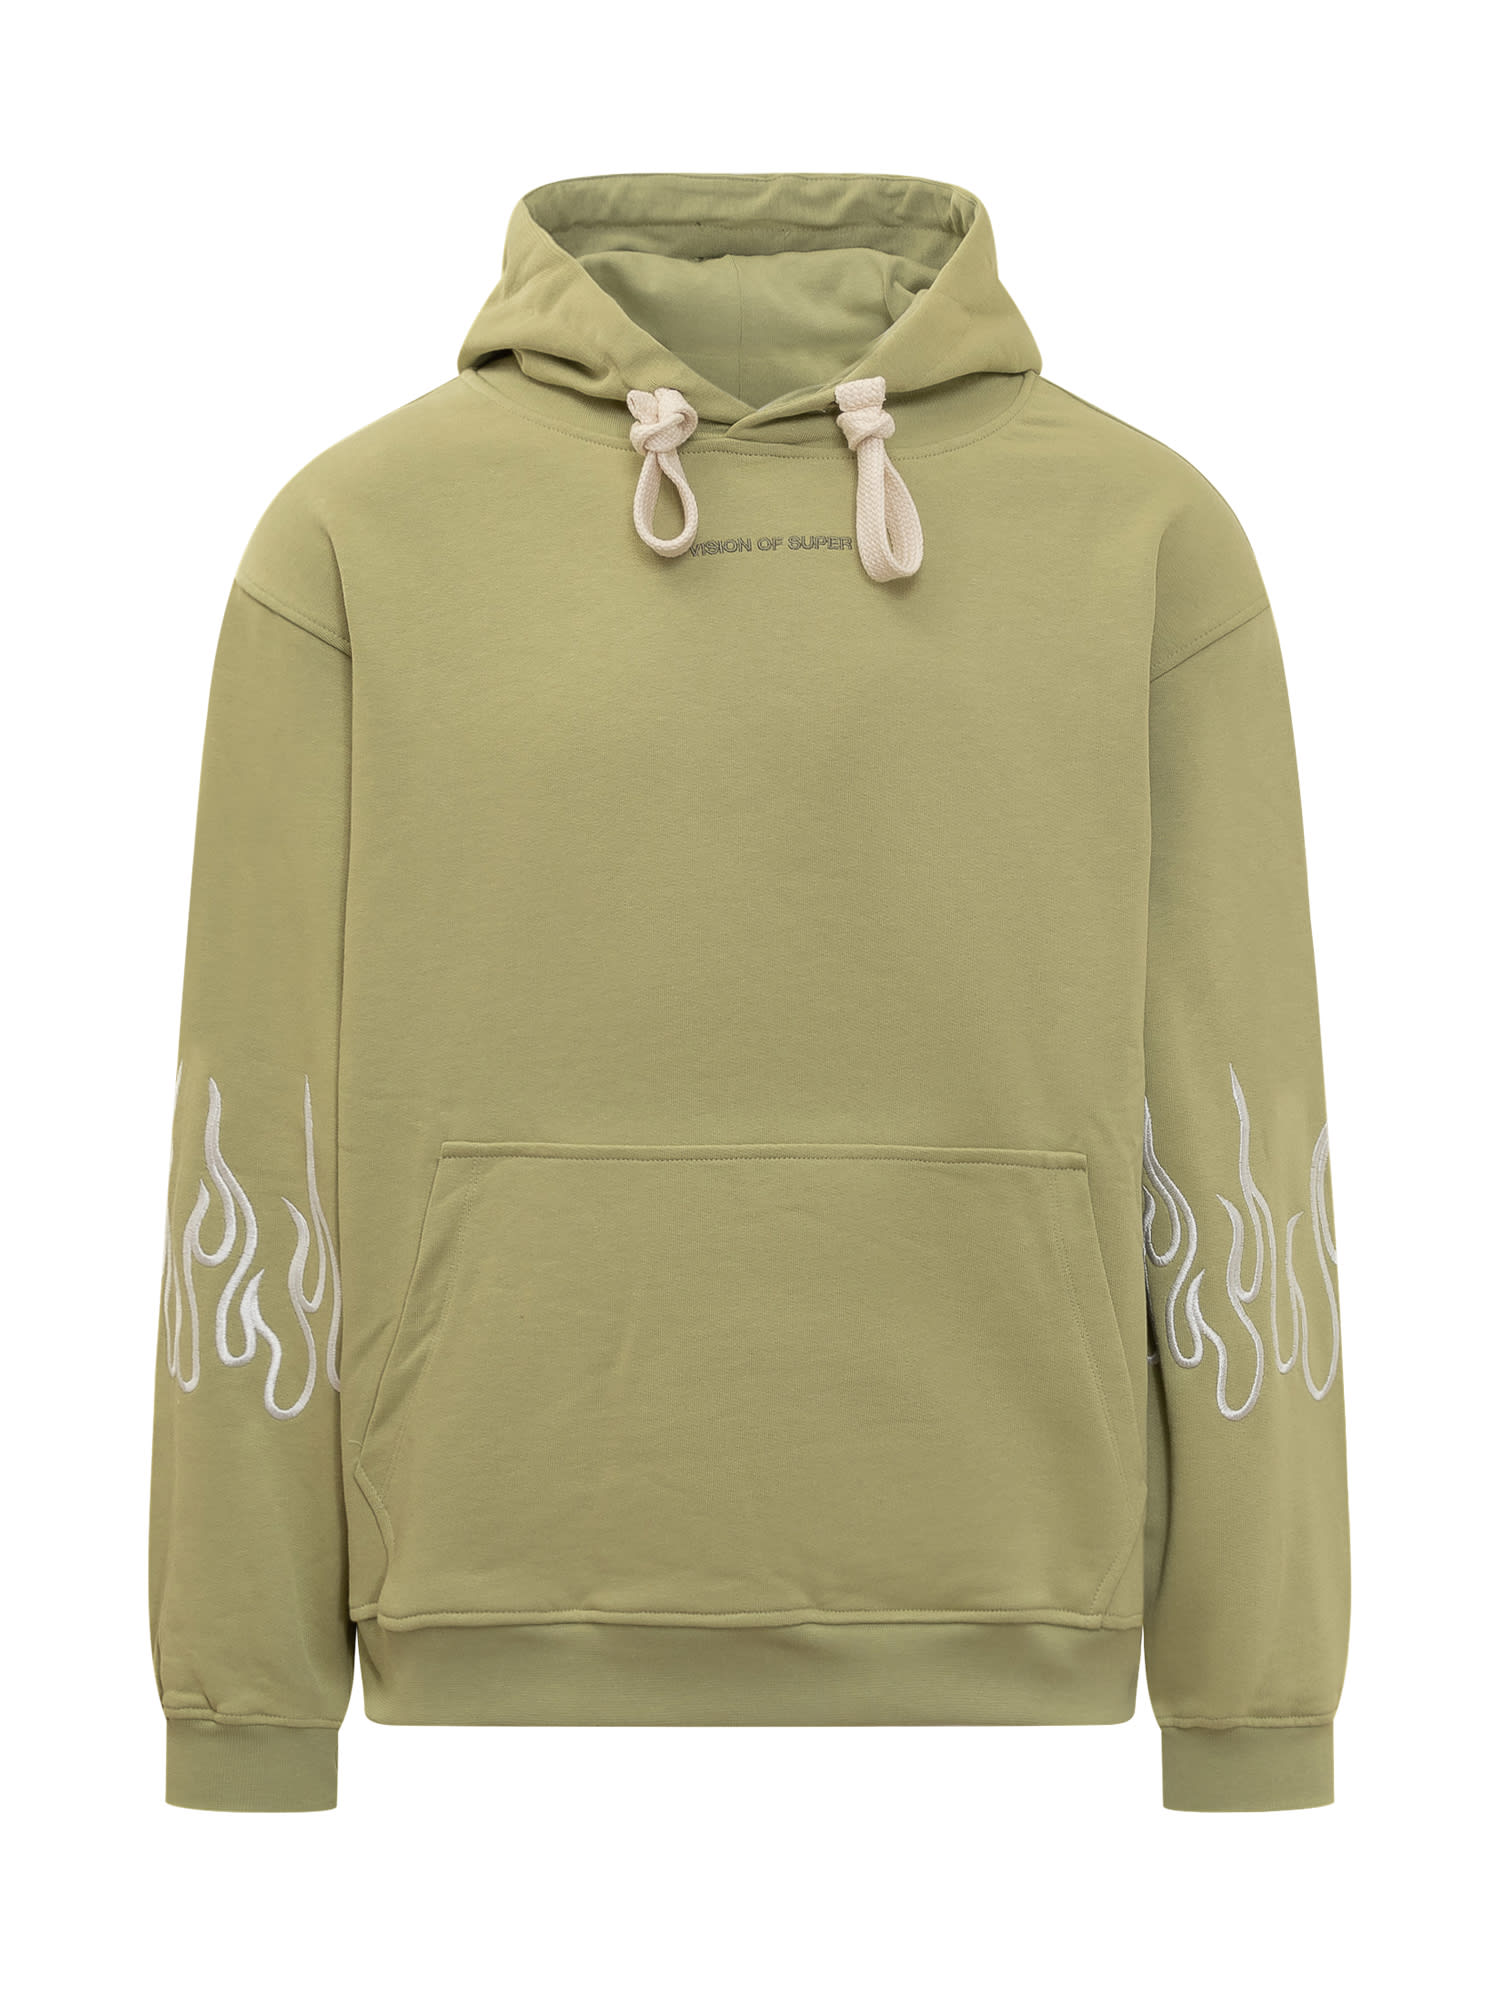 Vision Of Super Hoodie In Green Army